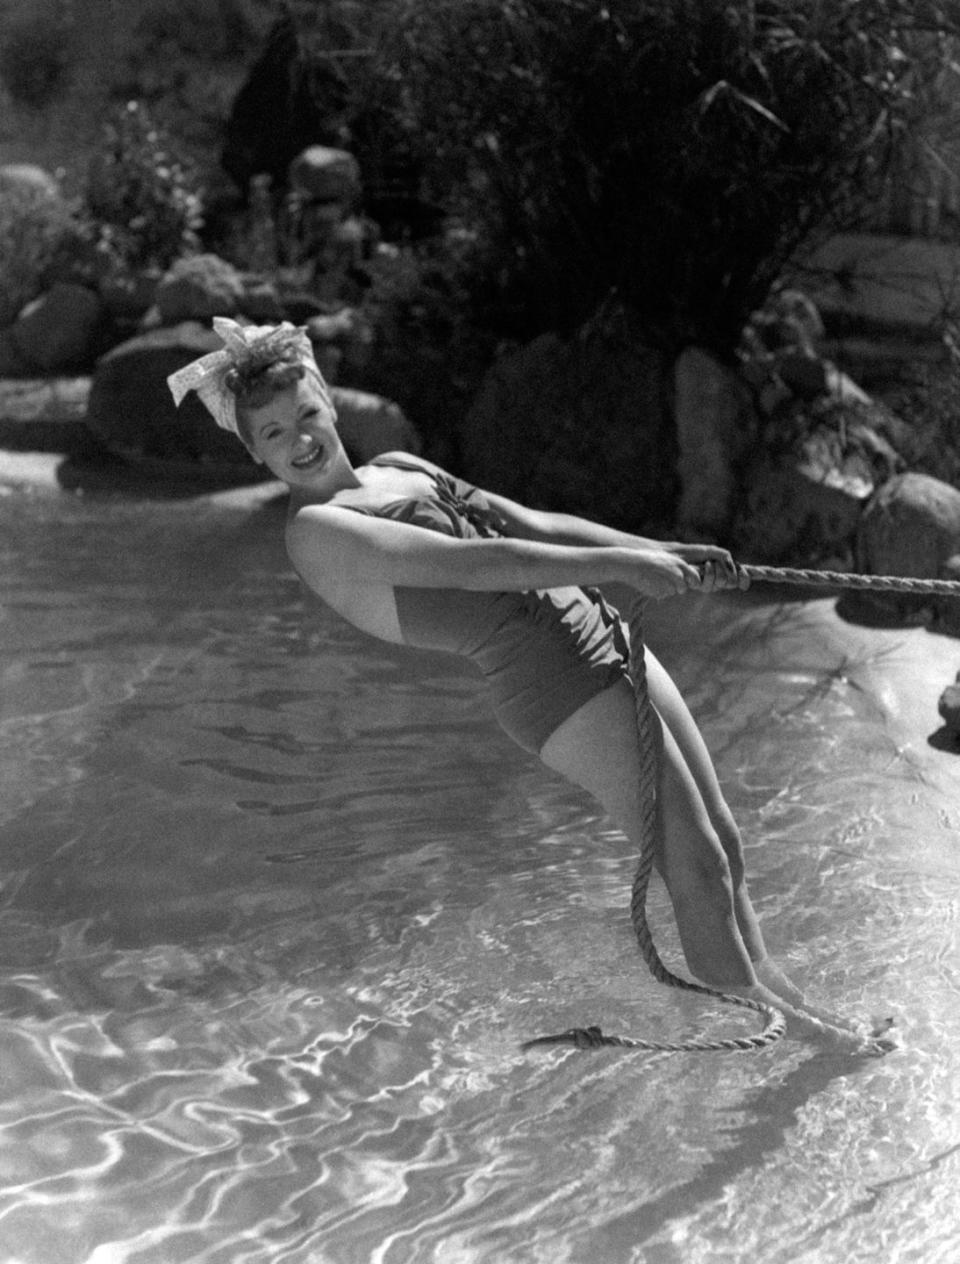 1940: Rocking a swimsuit with a cute vintage hairdo.